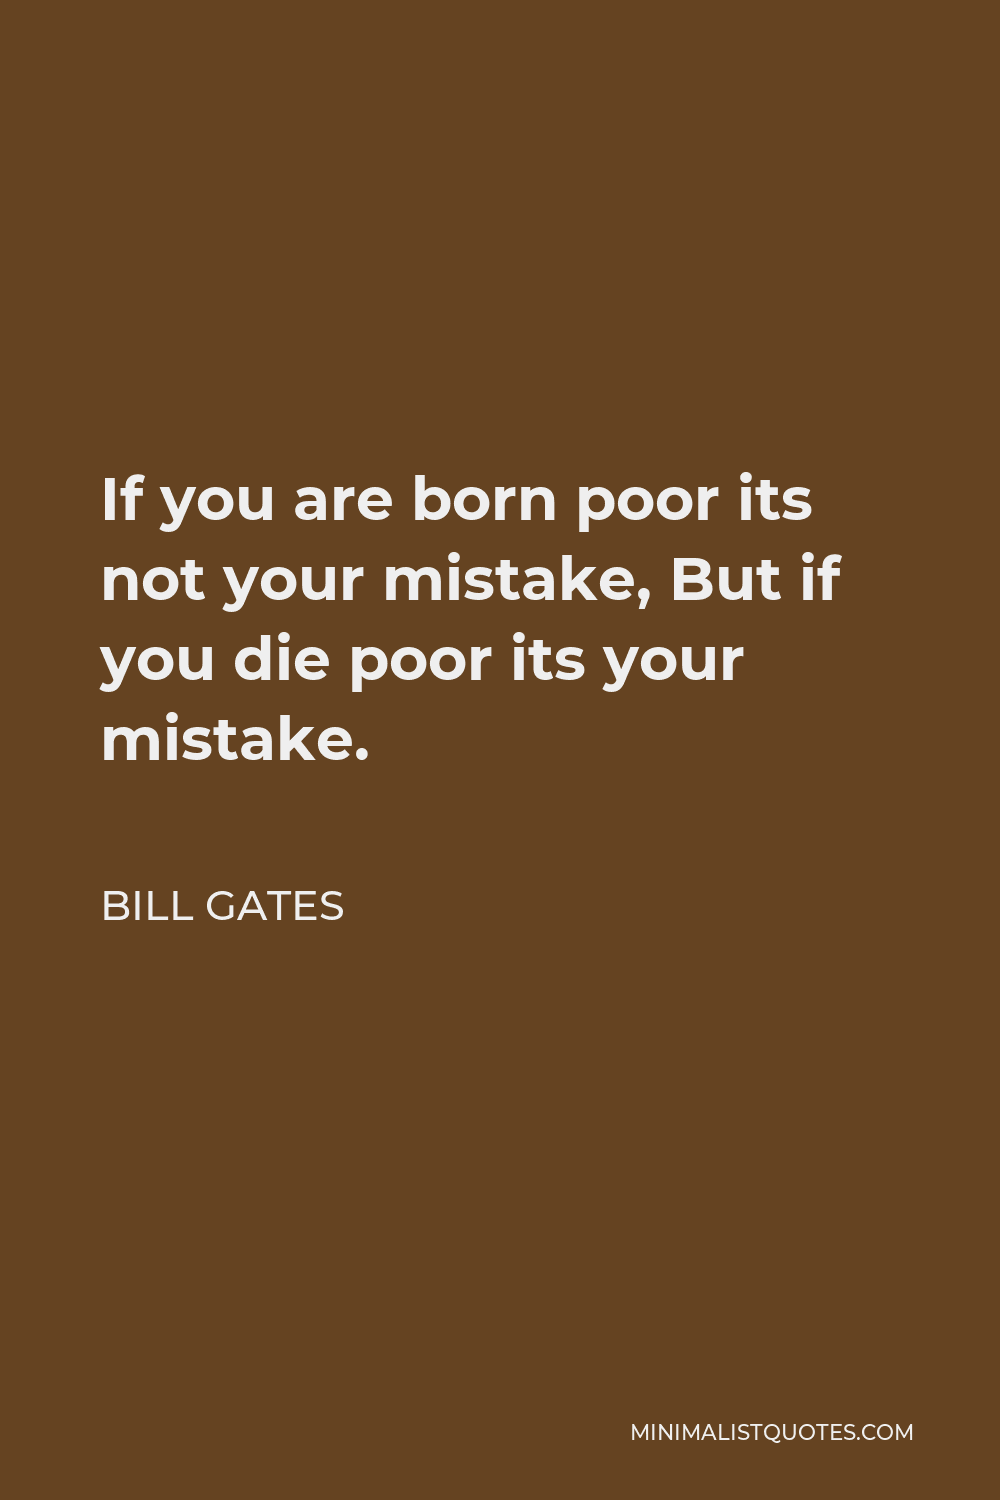 Bill Gates Quote - If you are born poor its not your mistake, But if you die poor its your mistake.